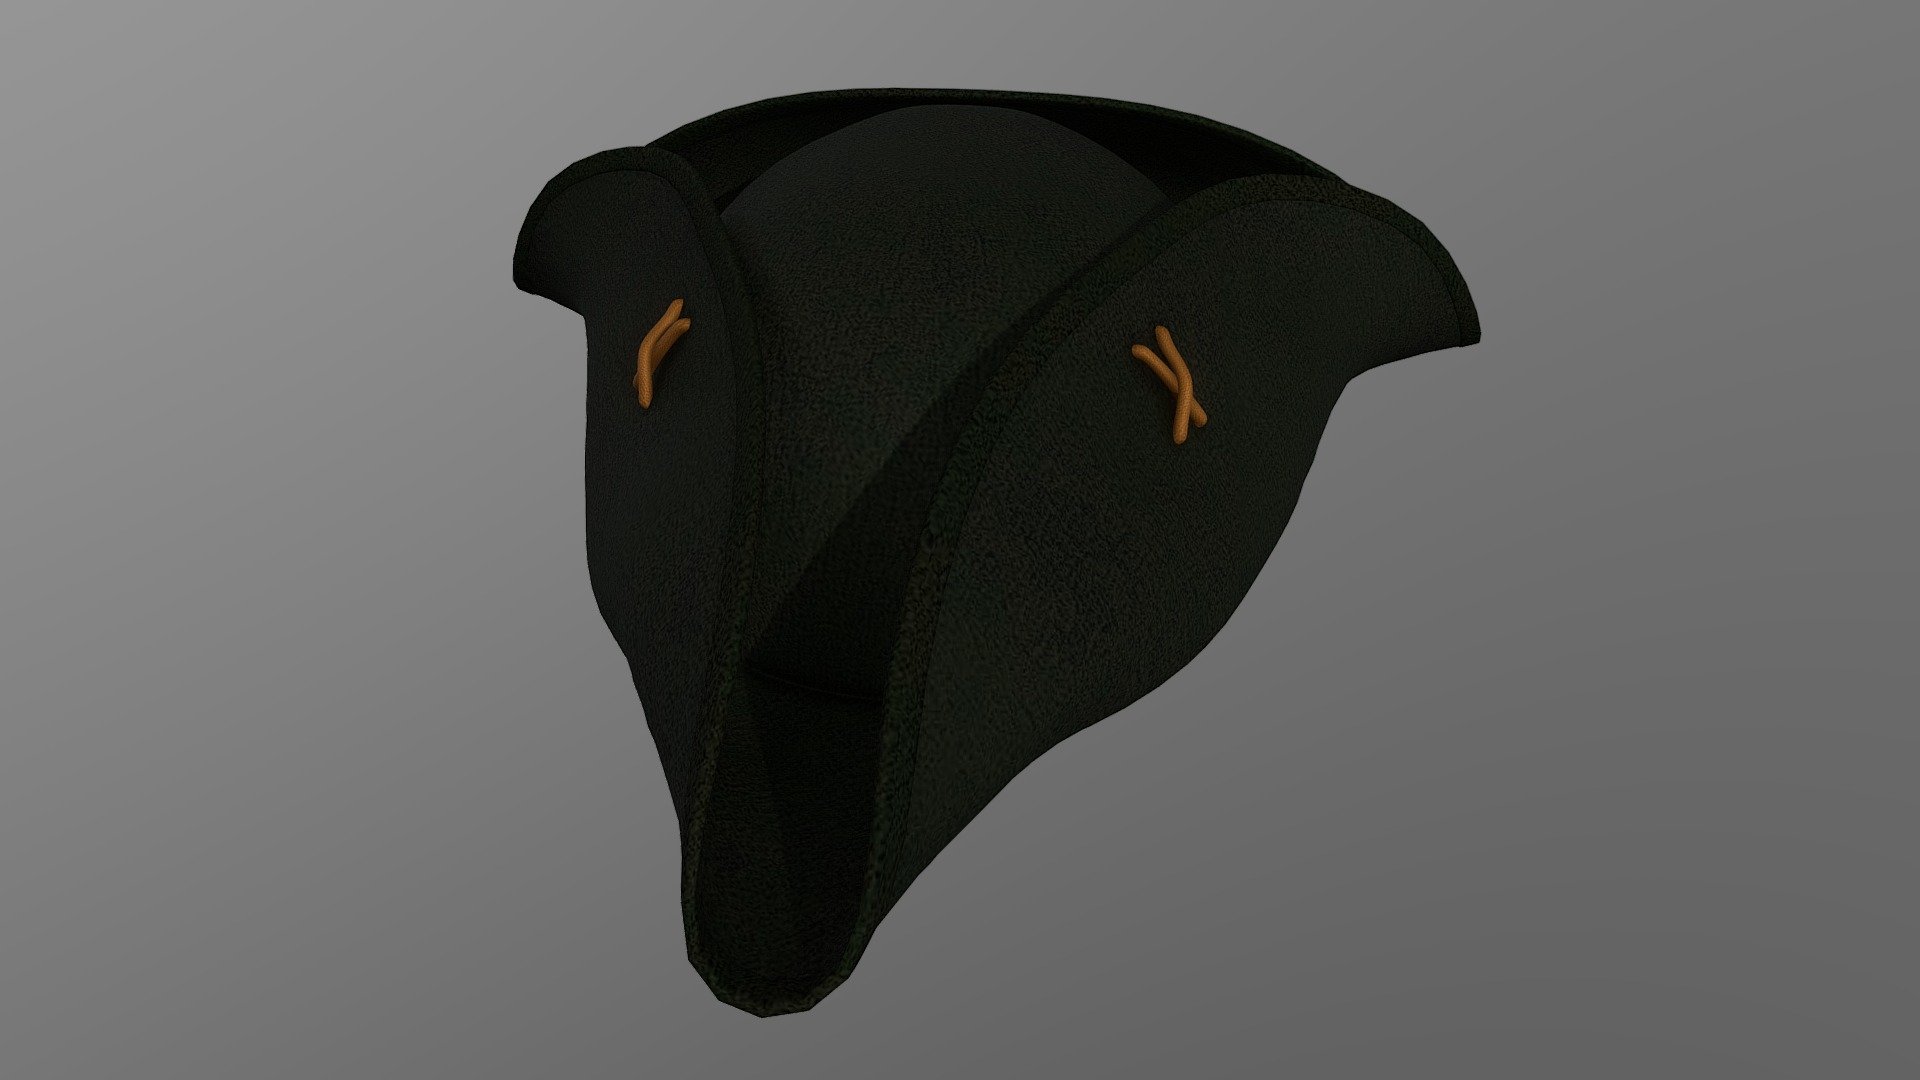 Tricorne Hat 2 (Green)
Bring your 3D model of a Tricorne Hat 2 to life with this low-poly design. Perfect for use in games, animations, VR, AR, and more, this model is optimized for performance and still retains a high level of detail.


Features



Low poly design with 11,106 vertices

21,936 edges

10,832 faces (polygons)

21,664 tris

2k PBR Textures and materials

File formats included: .obj, .fbx, .dae


Tools Used
This Tricorne Hat 2 3D model was created using Blender 3.3.1, a popular and versatile 3D creation software.


Availability
This low-poly Tricorne Hat 2 3D model is ready for use and available for purchase. Bring your project to the next level with this high-quality and optimized model 3d model